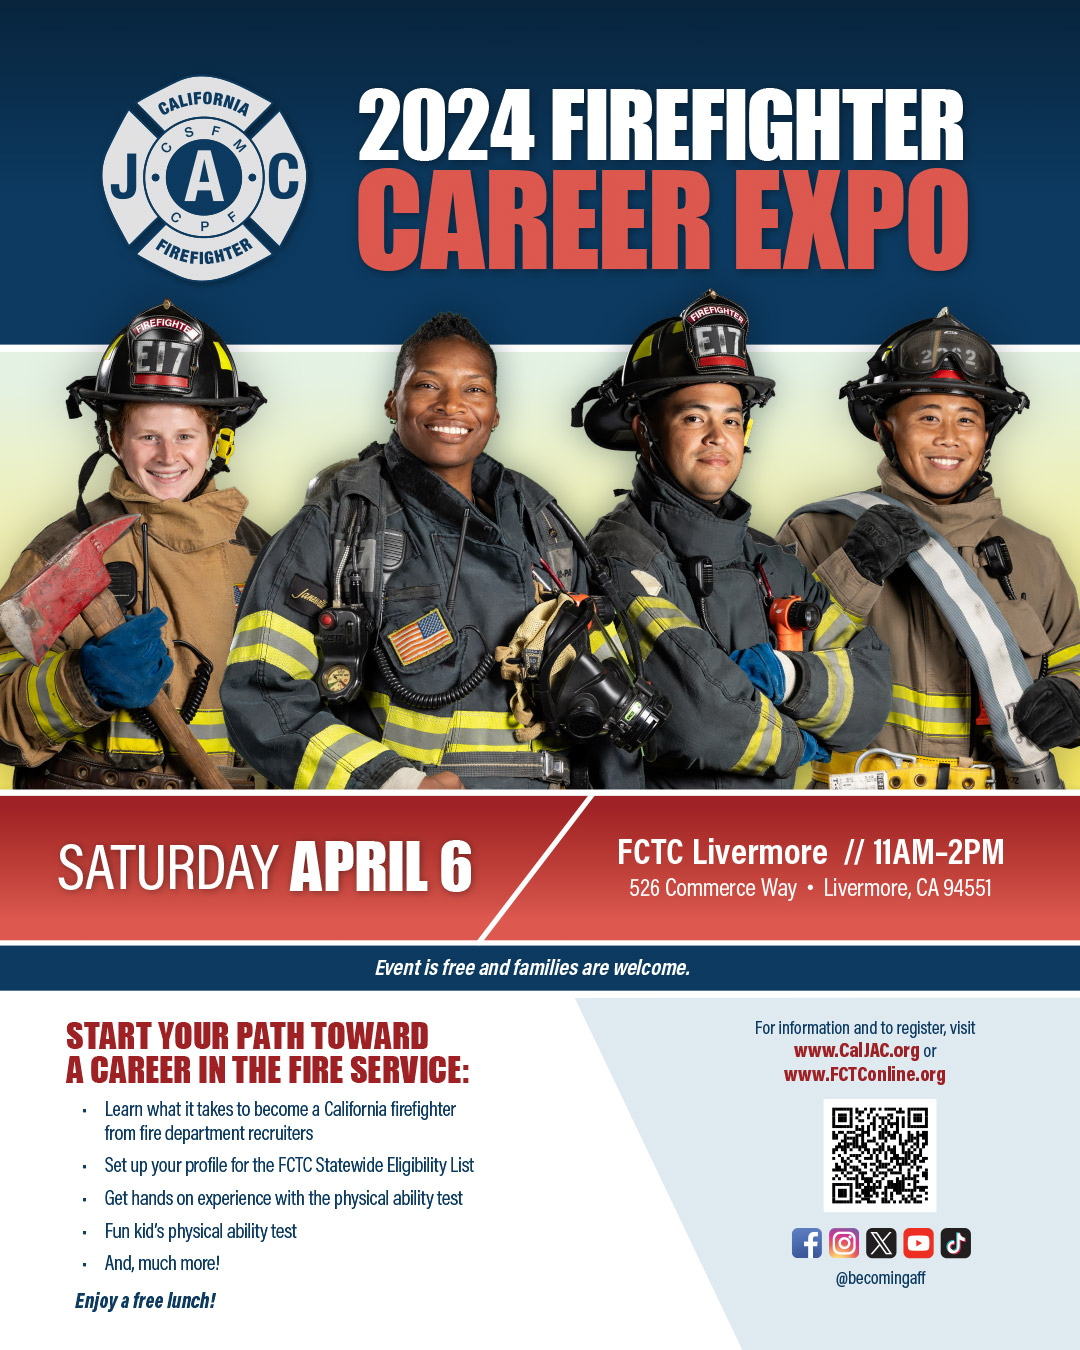 2024 Firefighter Career Expo - Livermore, CA - April 6, 2024